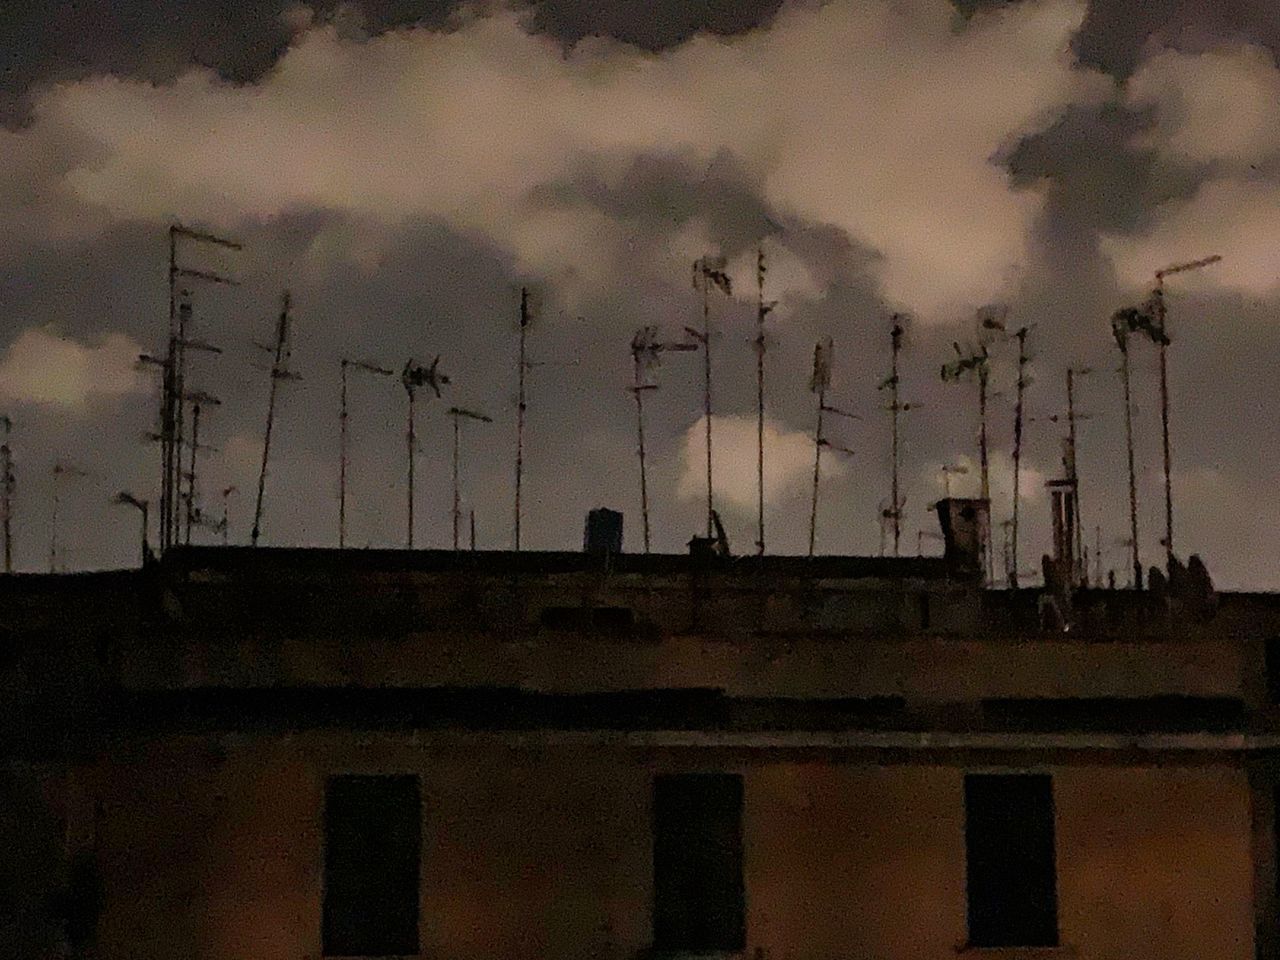 SILHOUETTE OF BUILDING AGAINST CLOUDY SKY AT DUSK